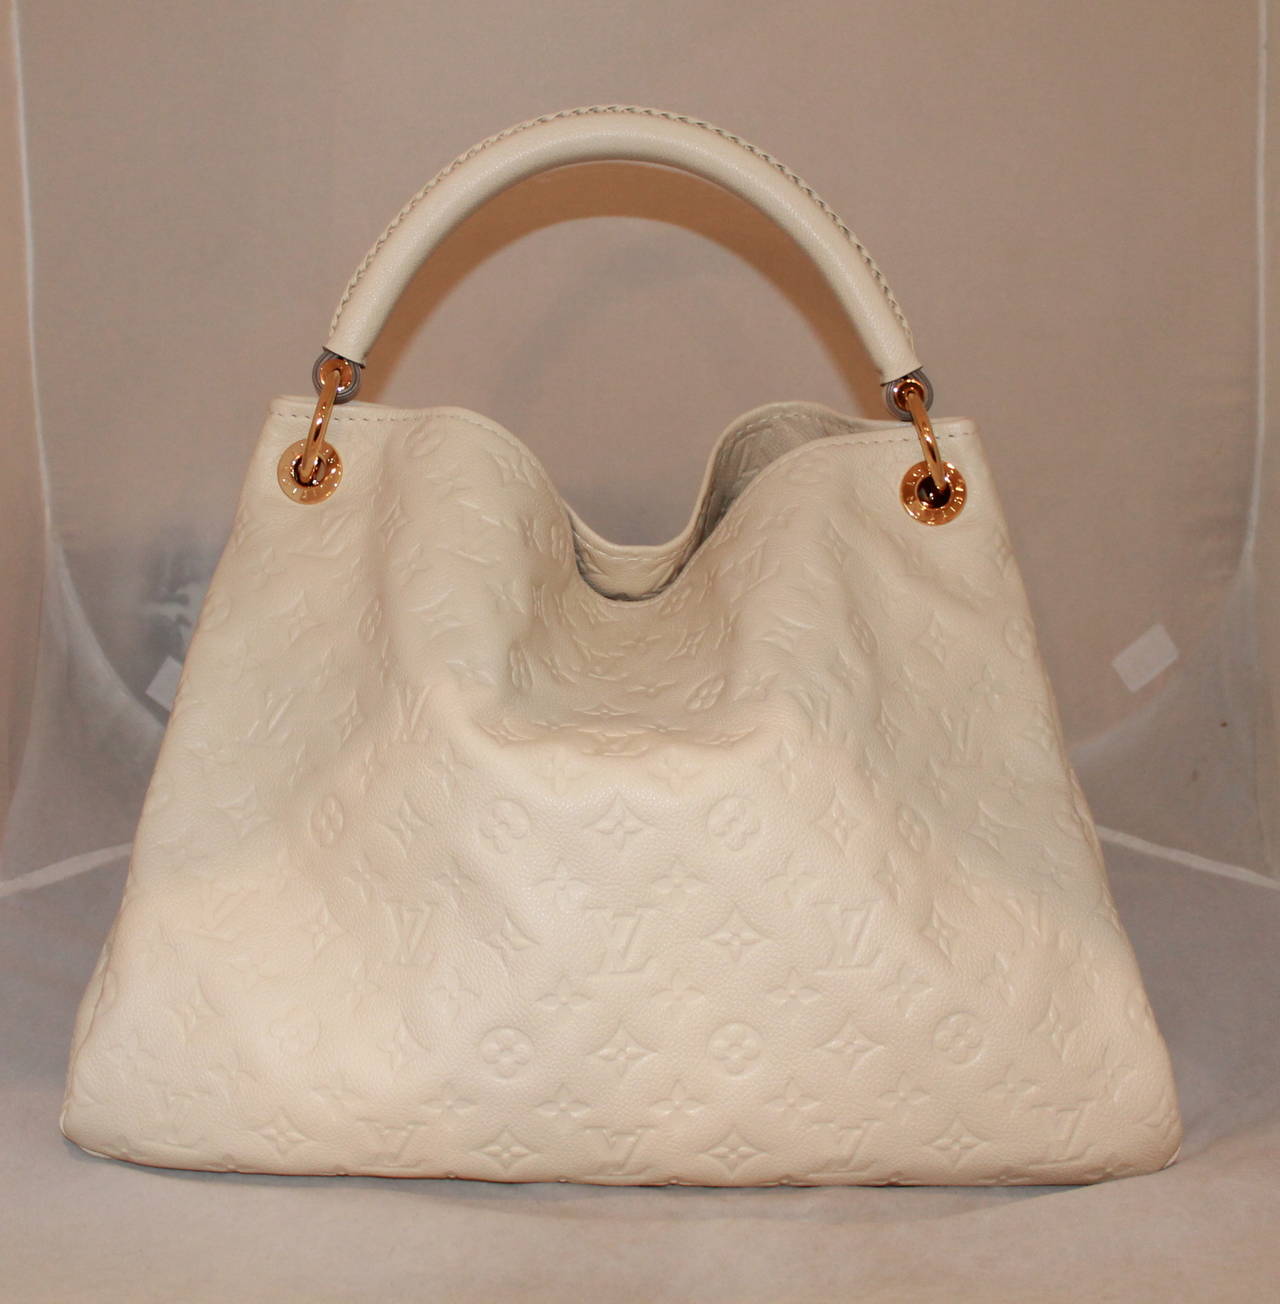 Louis+Vuitton+Artsy+Tote+MM+Ivory+Leather for sale online